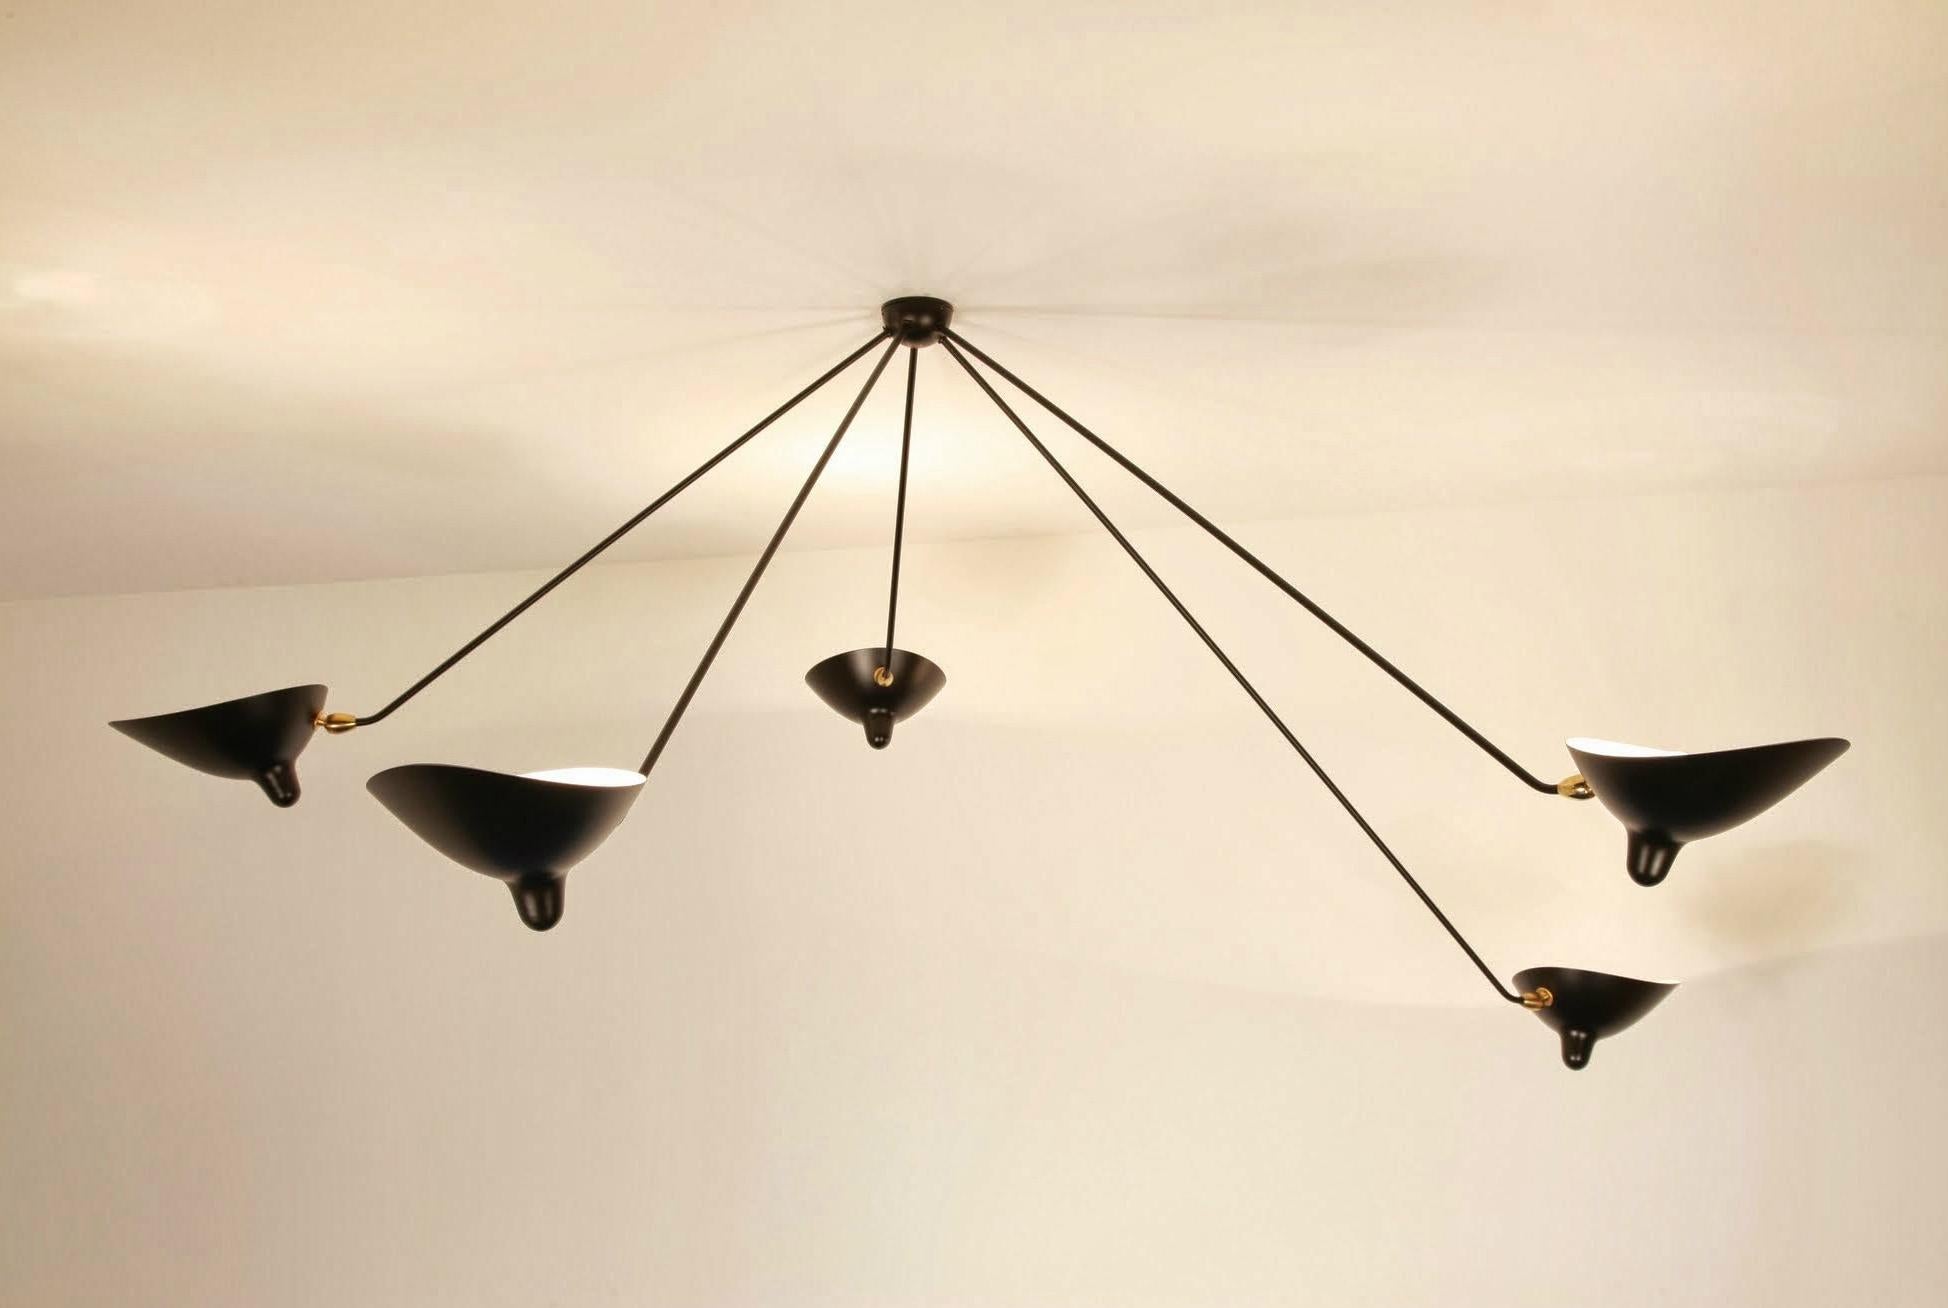 Contemporary Serge Mouille - Black or White Spider Ceiling Lamp with 5 Arms - IN STOCK! For Sale